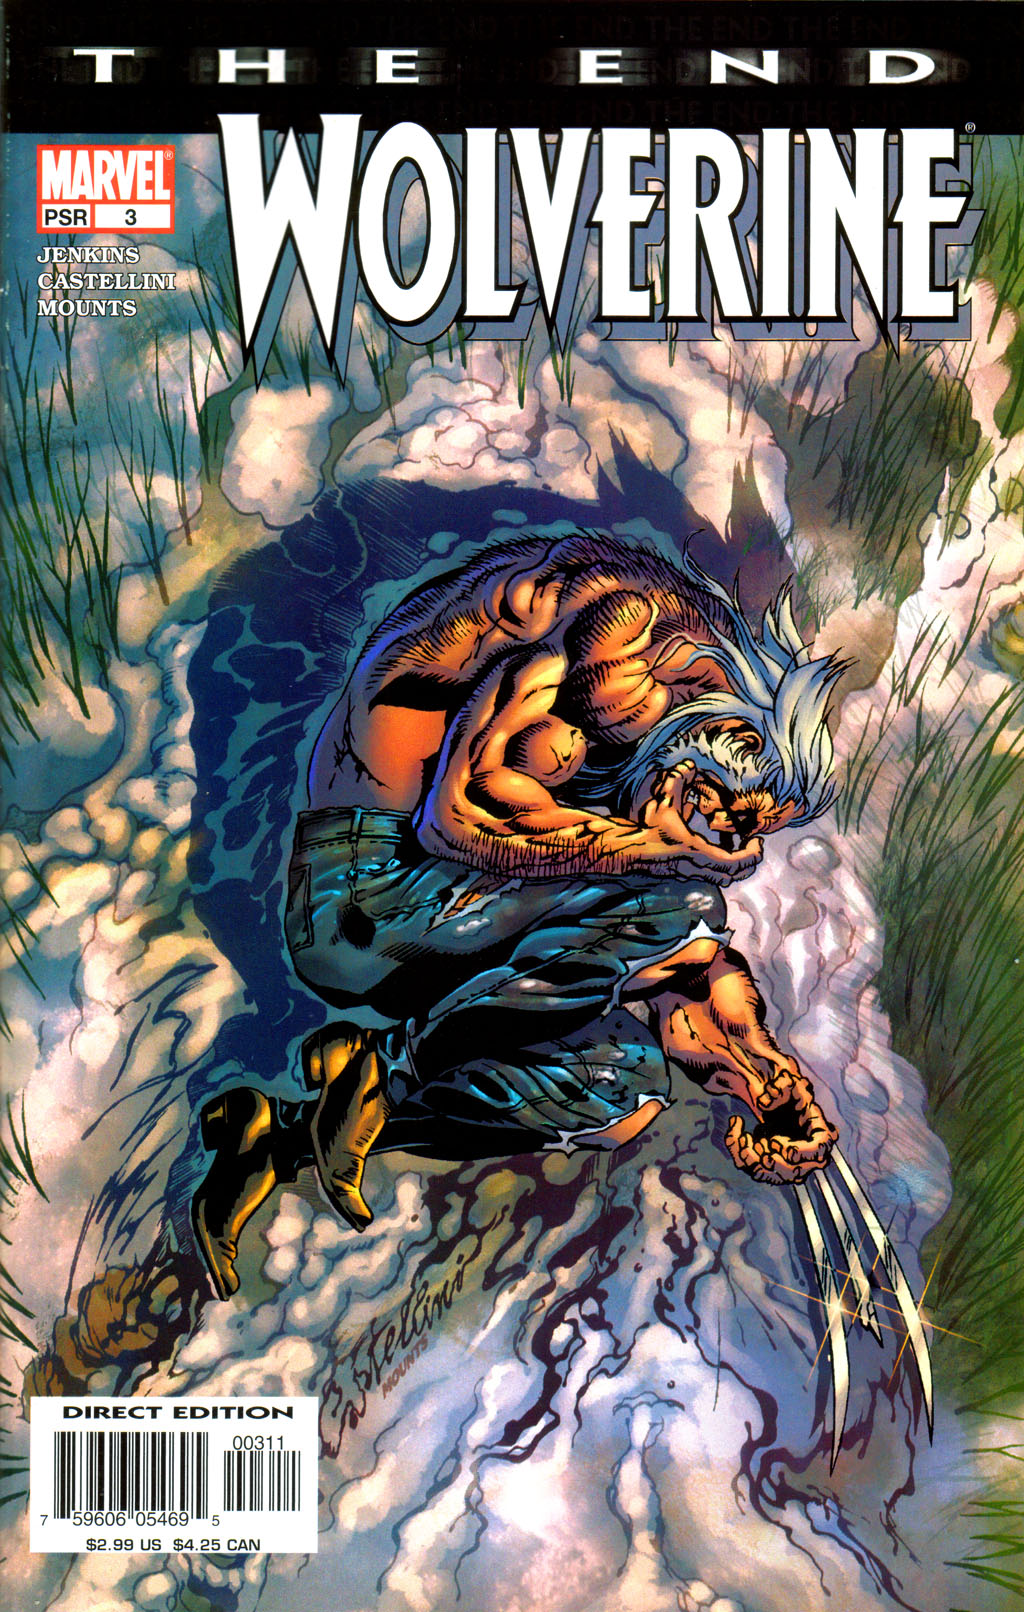 Wolverine: The End Vol. 1 #3